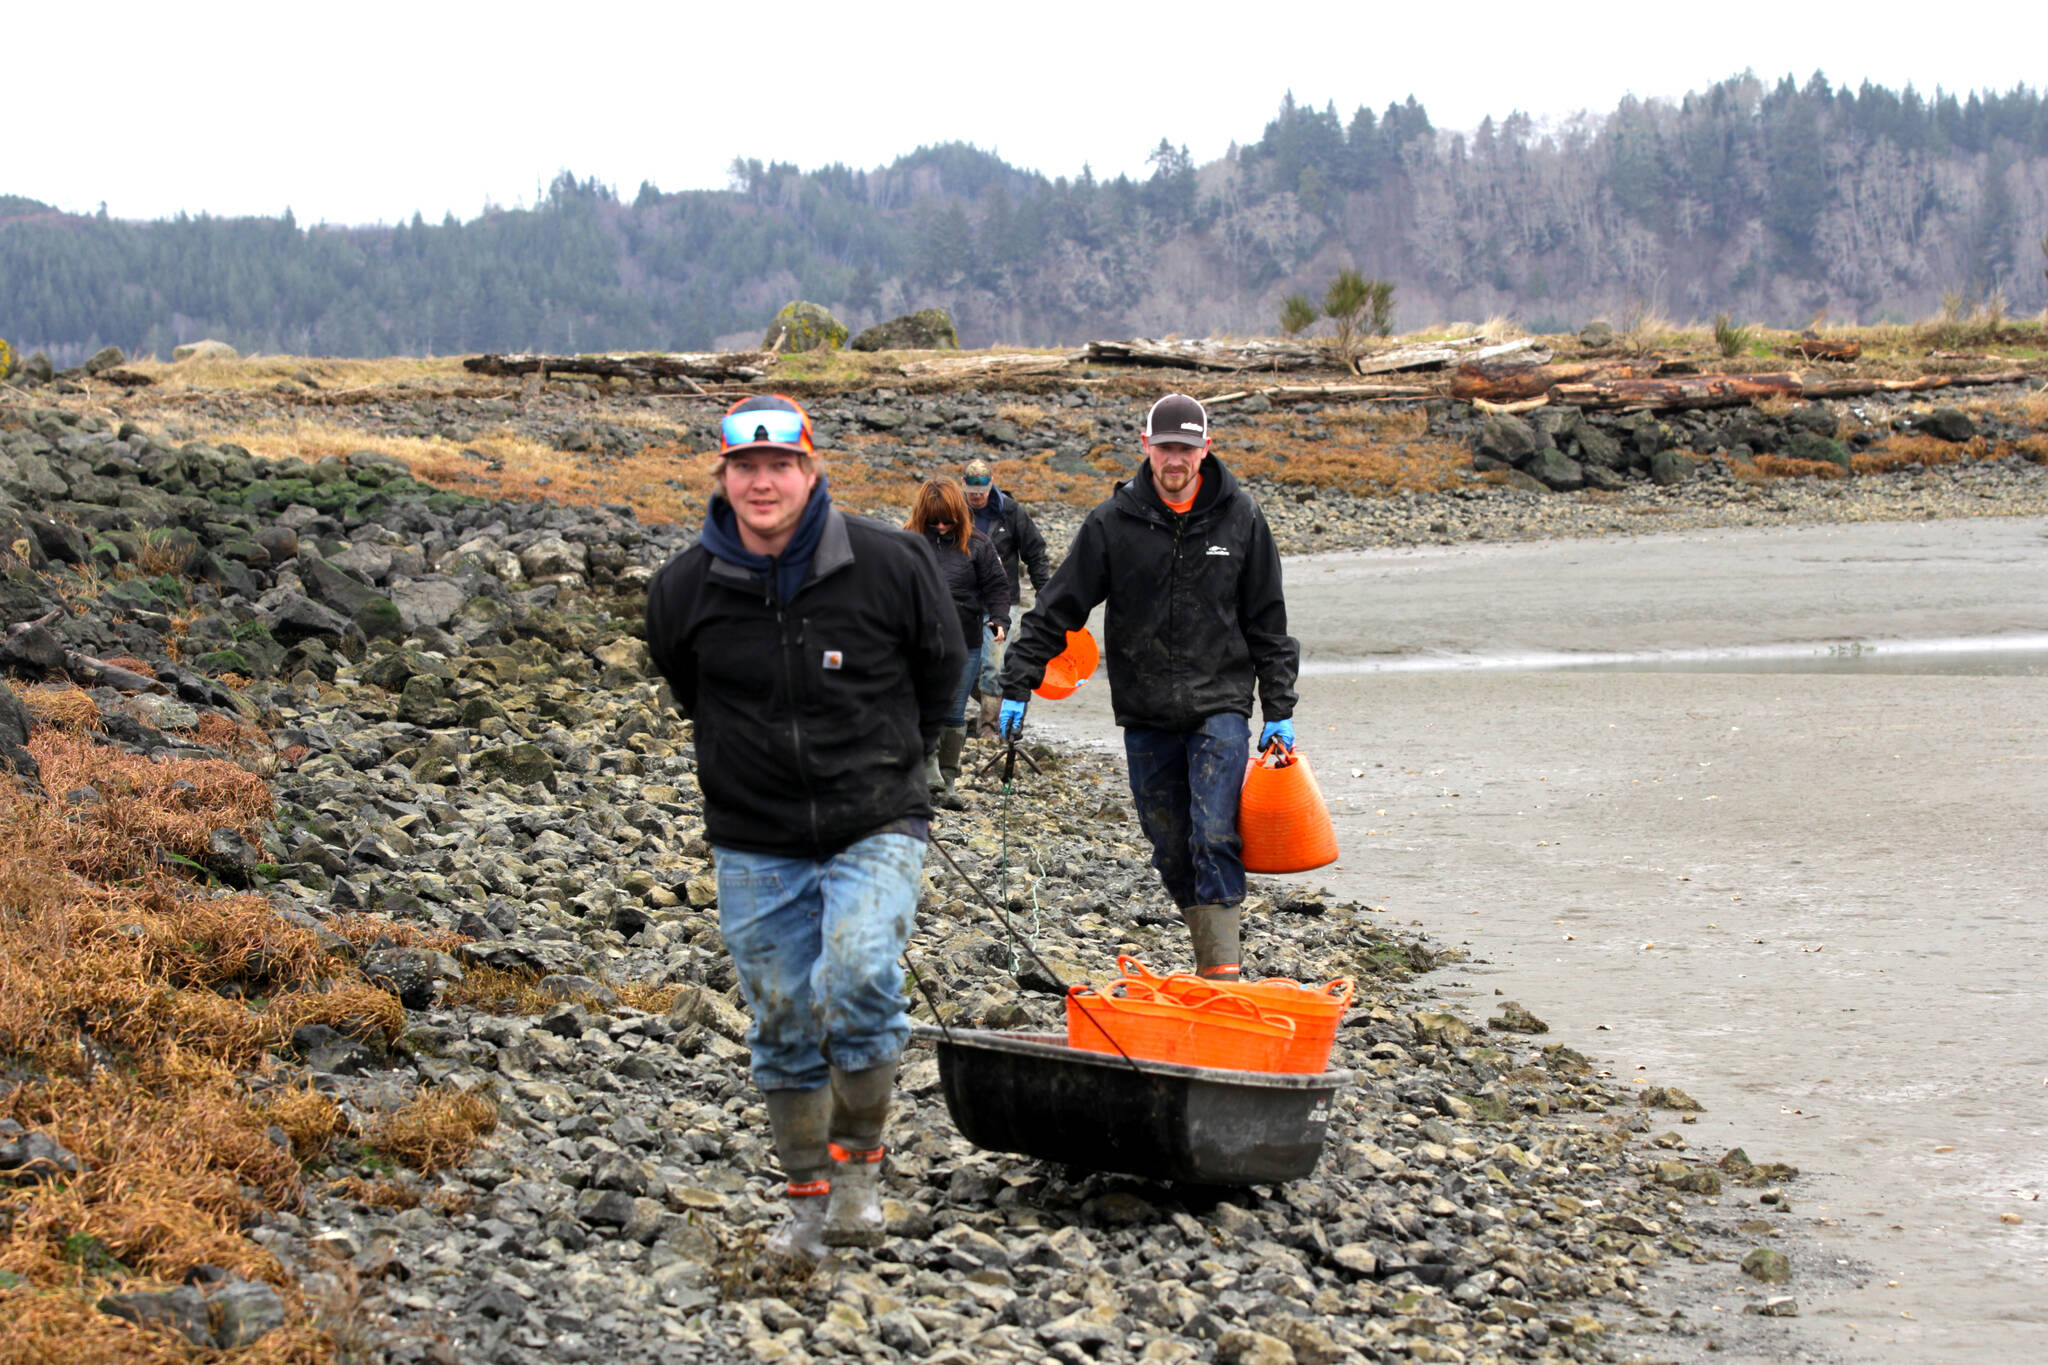 Members of the Shoalwater Bay Indian Tribe’s Department of Natural Resources removing European green crabs drag their bounty back from the tidal mud flats on Jan. 26. (MIchael S. Lockett / The Daily World)